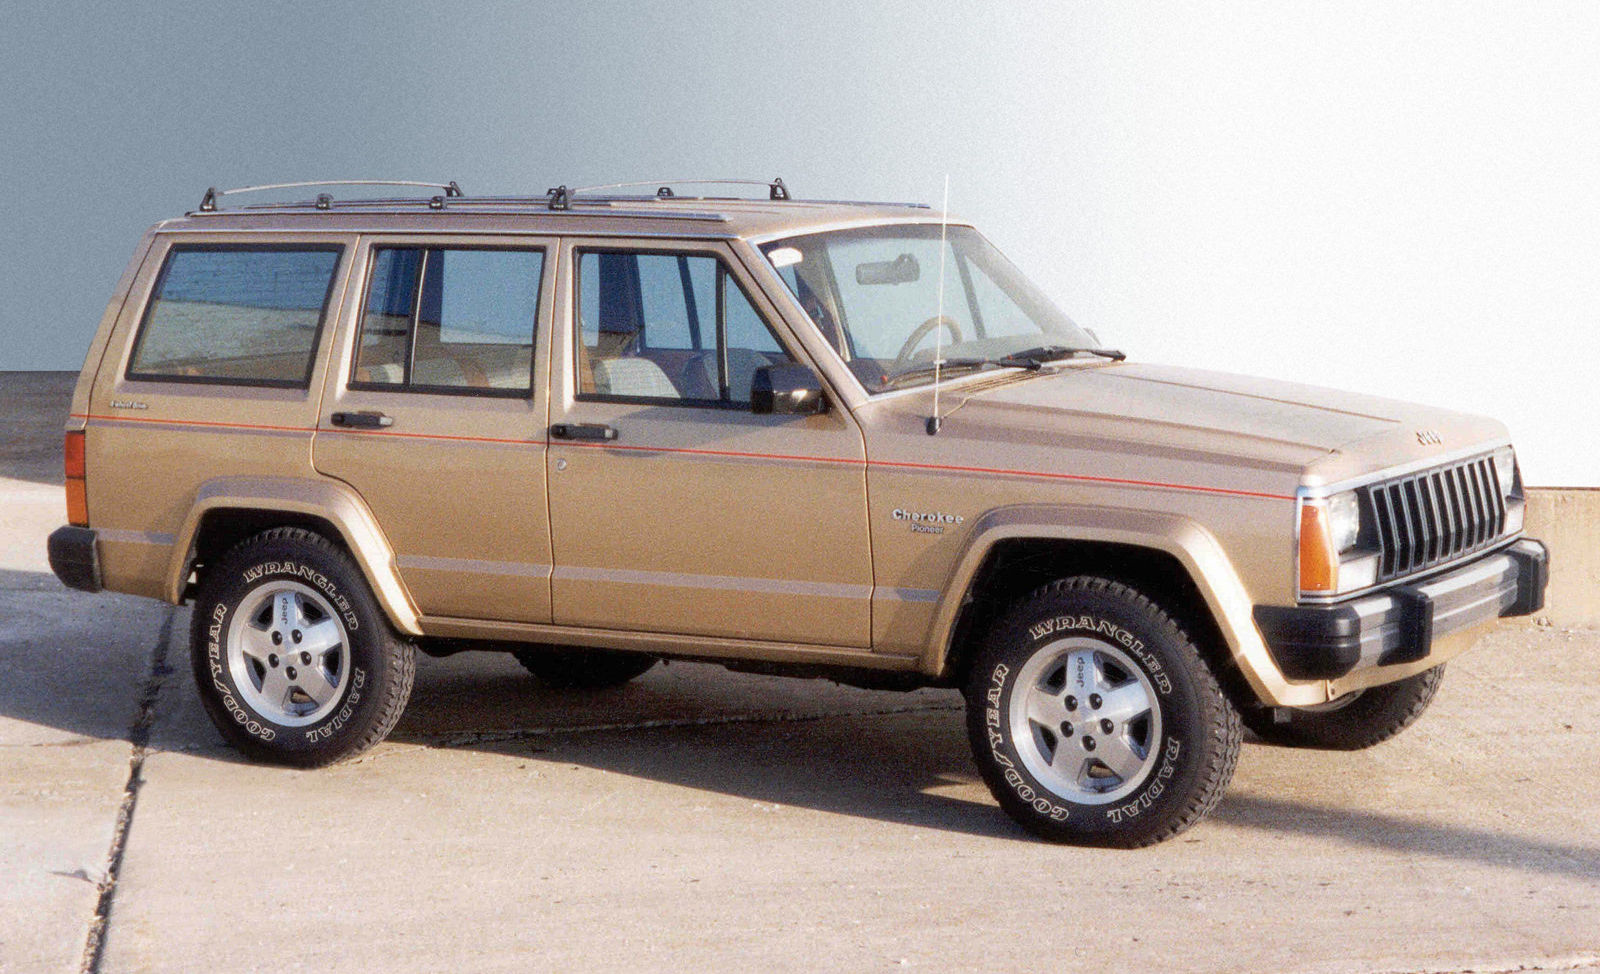 Evolution of SUVs From Ancient Carriages to Modern Electric Vehicles